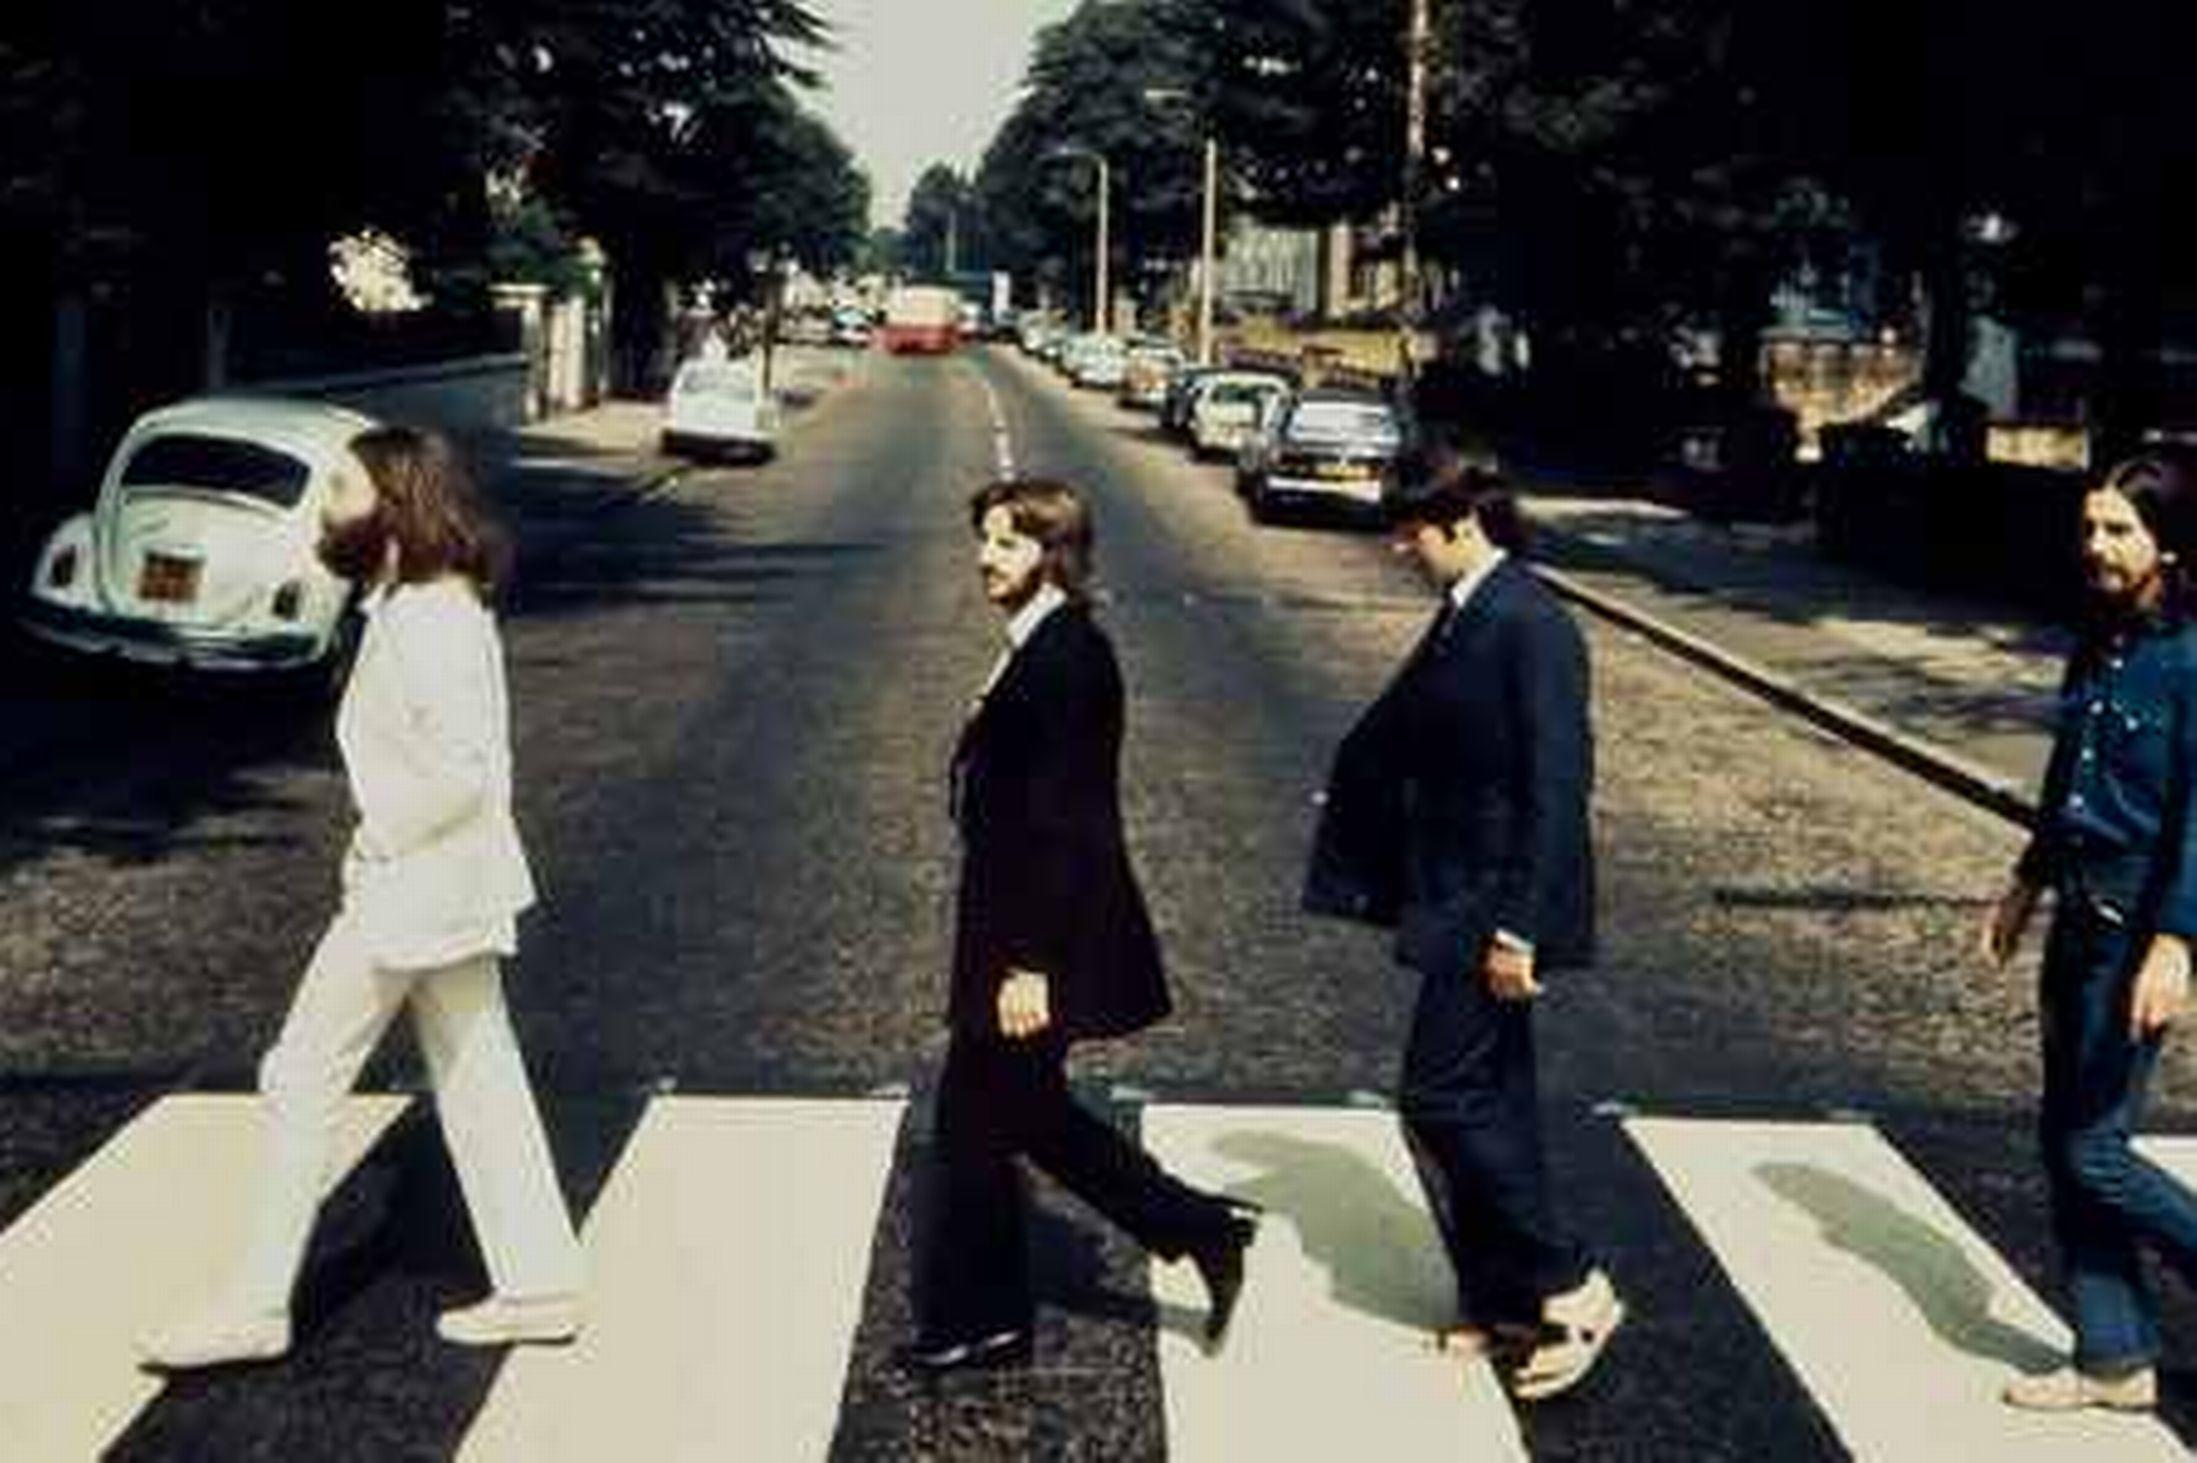 The Beatles Abbey Road Wallpapers Top Free The Beatles Abbey Road Backgrounds Wallpaperaccess